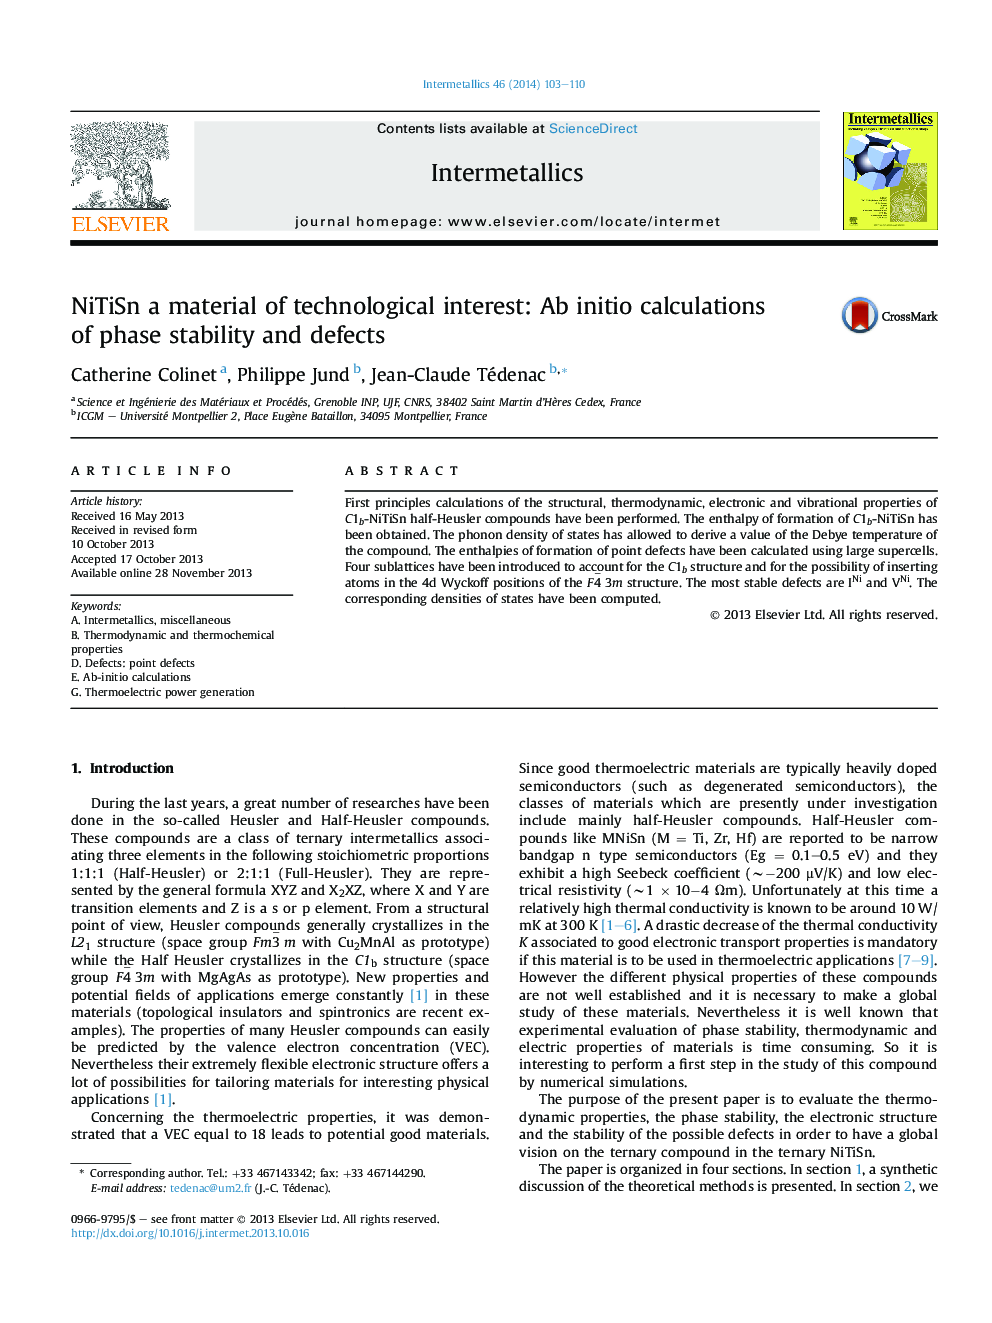 NiTiSn a material of technological interest: Ab initio calculations of phase stability and defects